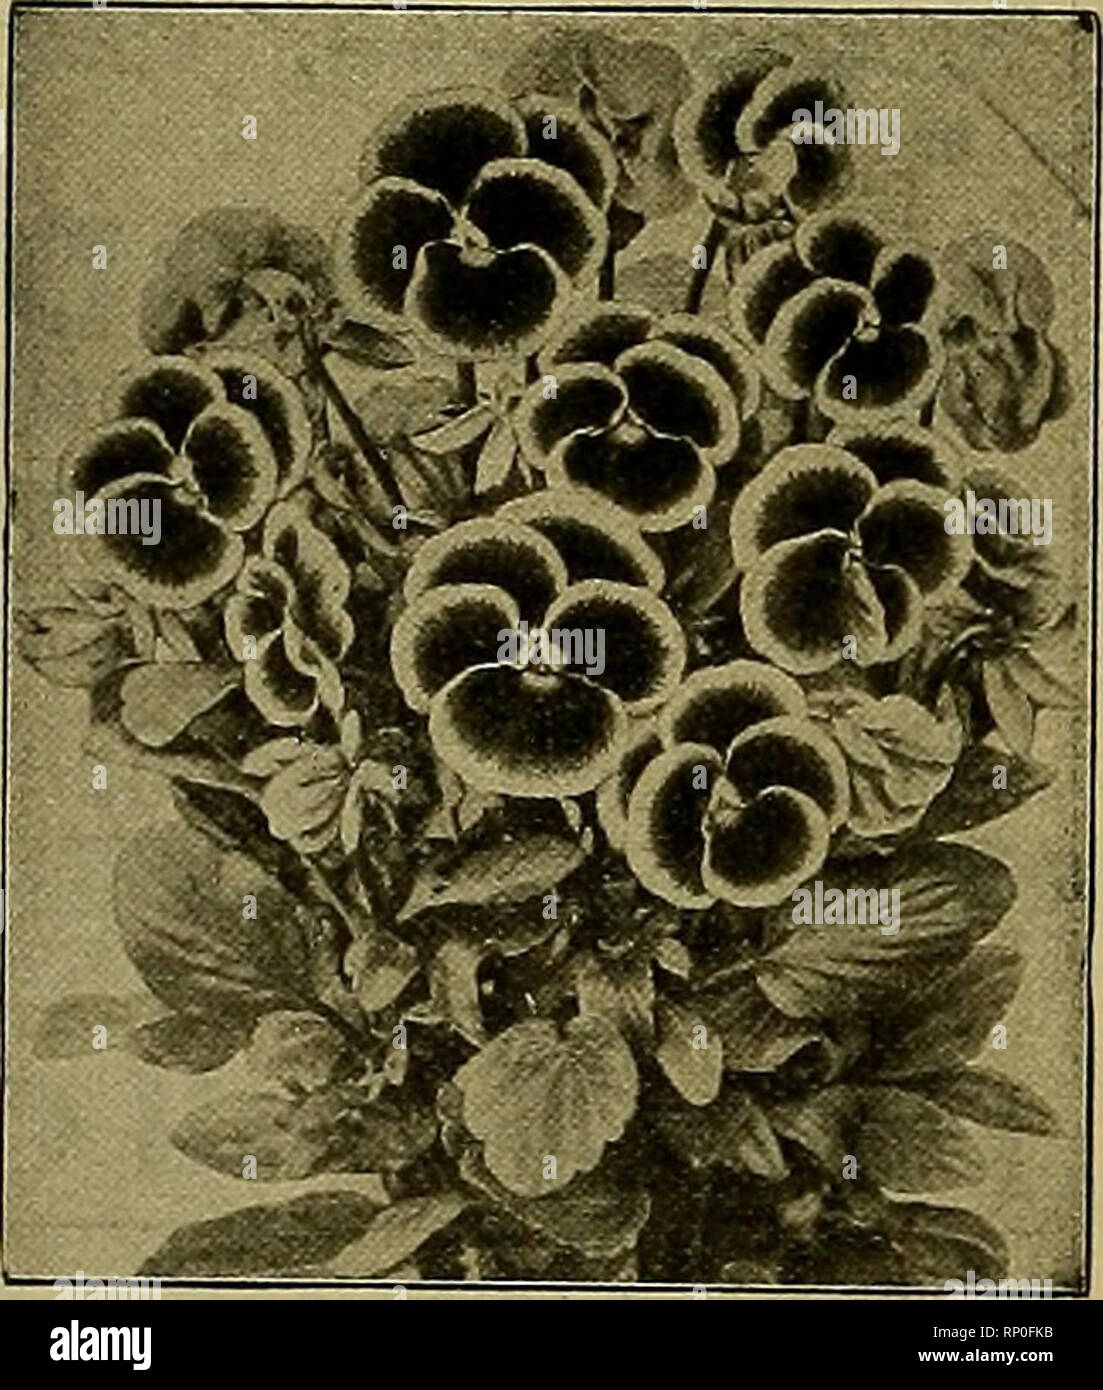 . The American florist : a weekly journal for the trade. Floriculture; Florists. GIANT PANSY SEED Kenilworth Strain, light, niedium or dark mixture. Kenilworth Show. An extra fine stra 11 of large tiowers. Masterpiece. Curled, waw petals. Orchid Flowered. Mixed. Giant Bronze and Copper Mixture. Giant Fancy margined and edged. 1000 seeds, 25c; 5000, $1.00; ia-oz„ $1.25; 1 oz., $5.U0. For fuller descriptions see my ad. in July and August 2nd. 9th and 16th issues. Pansiesin separate colors, lOOO seeds, 25c. Giant Royal Purple. Giant Adonis, Giant Emperor William. Giant Dark Blue. Giant King of th Stock Photo